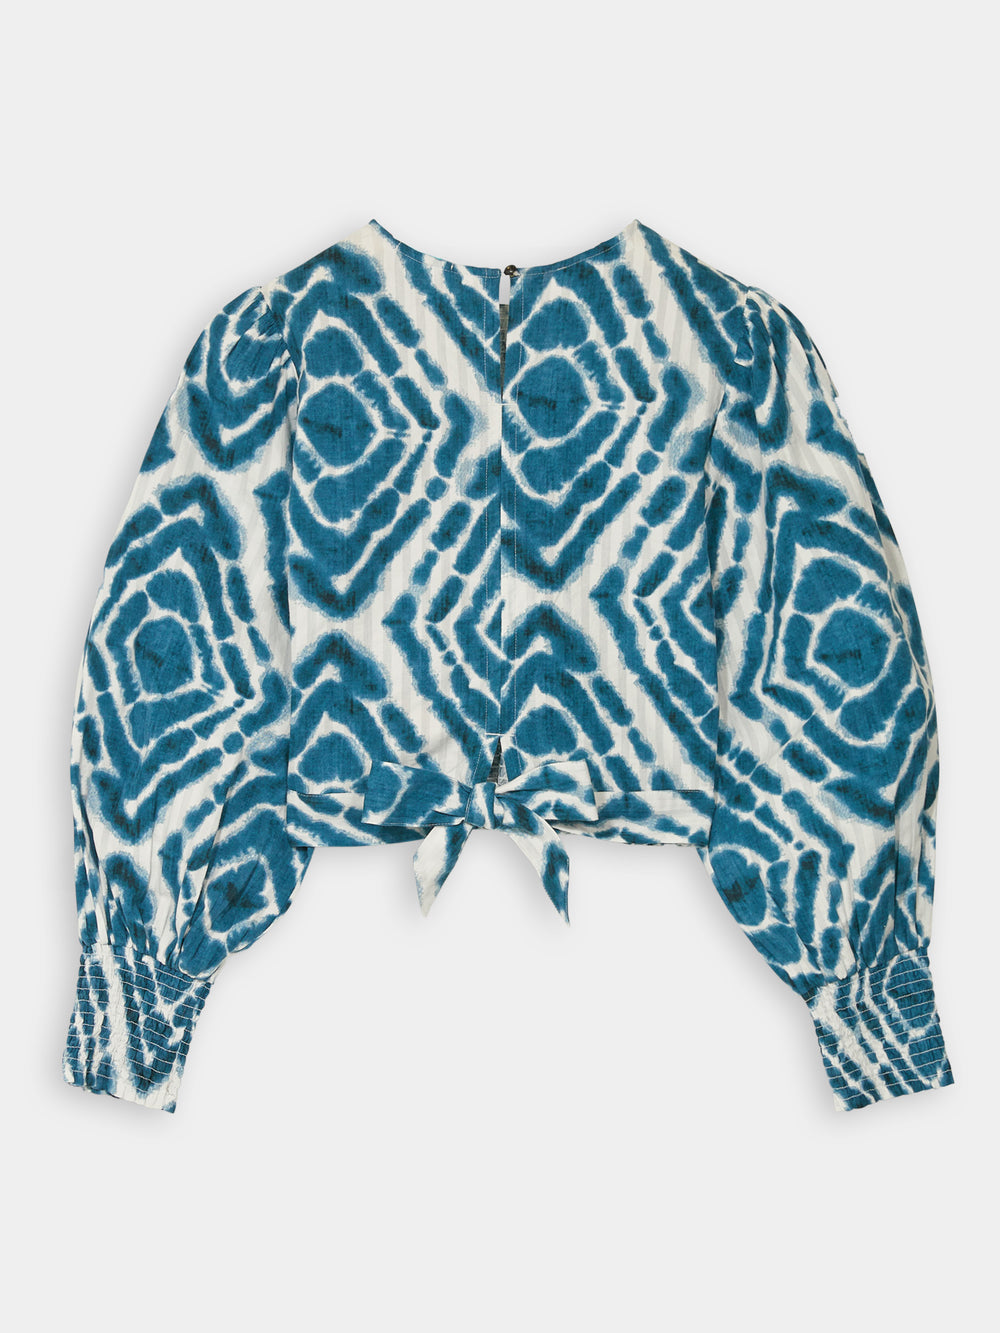 Long sleeved tie-dyed smocked blouse - Scotch & Soda NZ